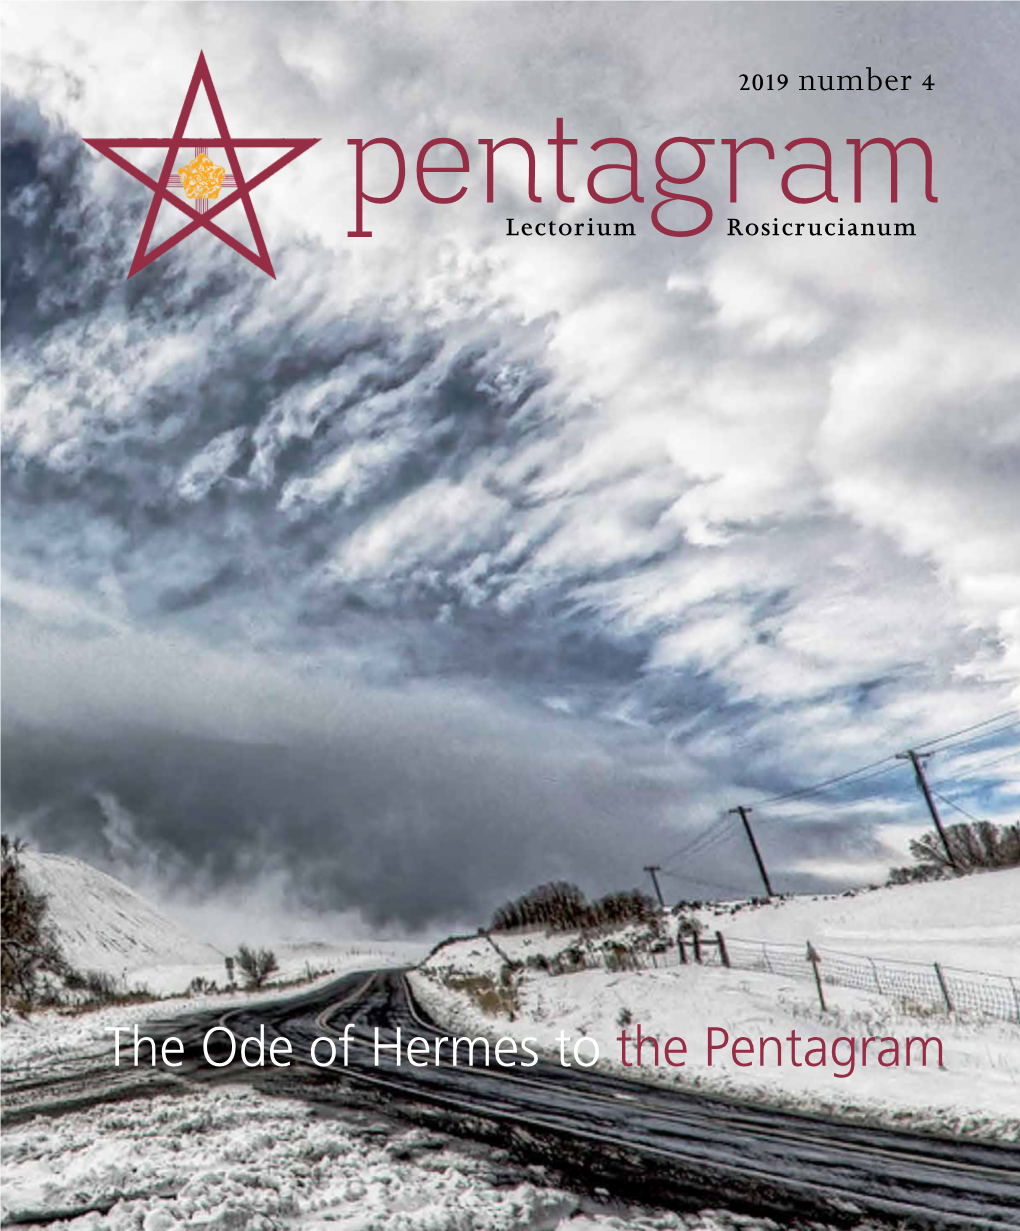 The Ode of Hermes to the Pentagram